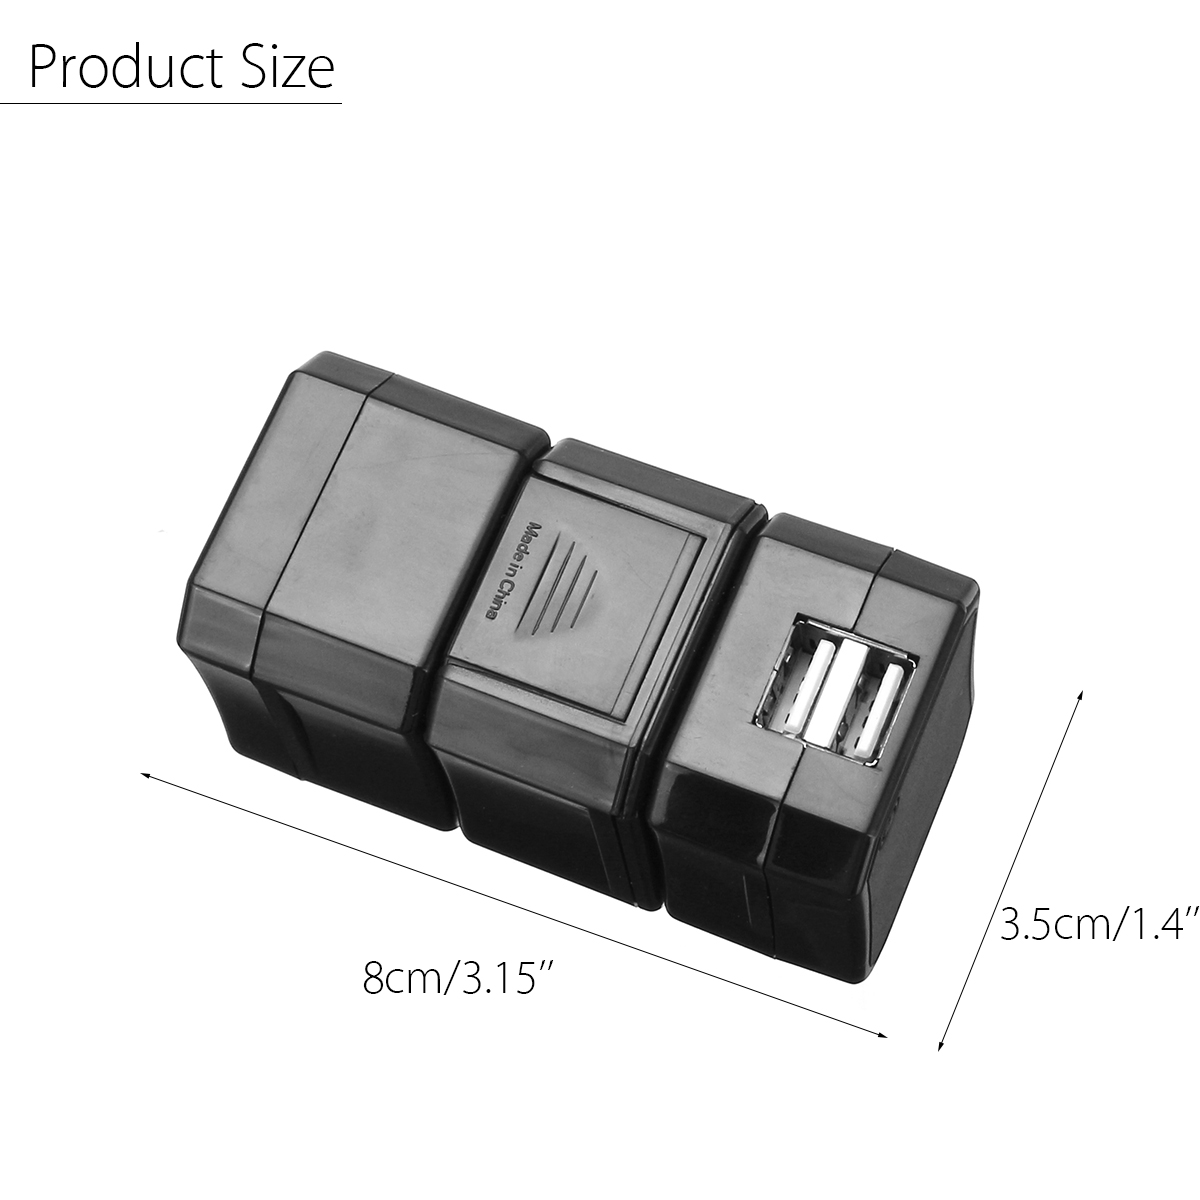 Travel-Adapter-Universal-Power-Adapter-with-2-USB-Ports-Wall-Charger-AC-Power-Plug-1304296-7